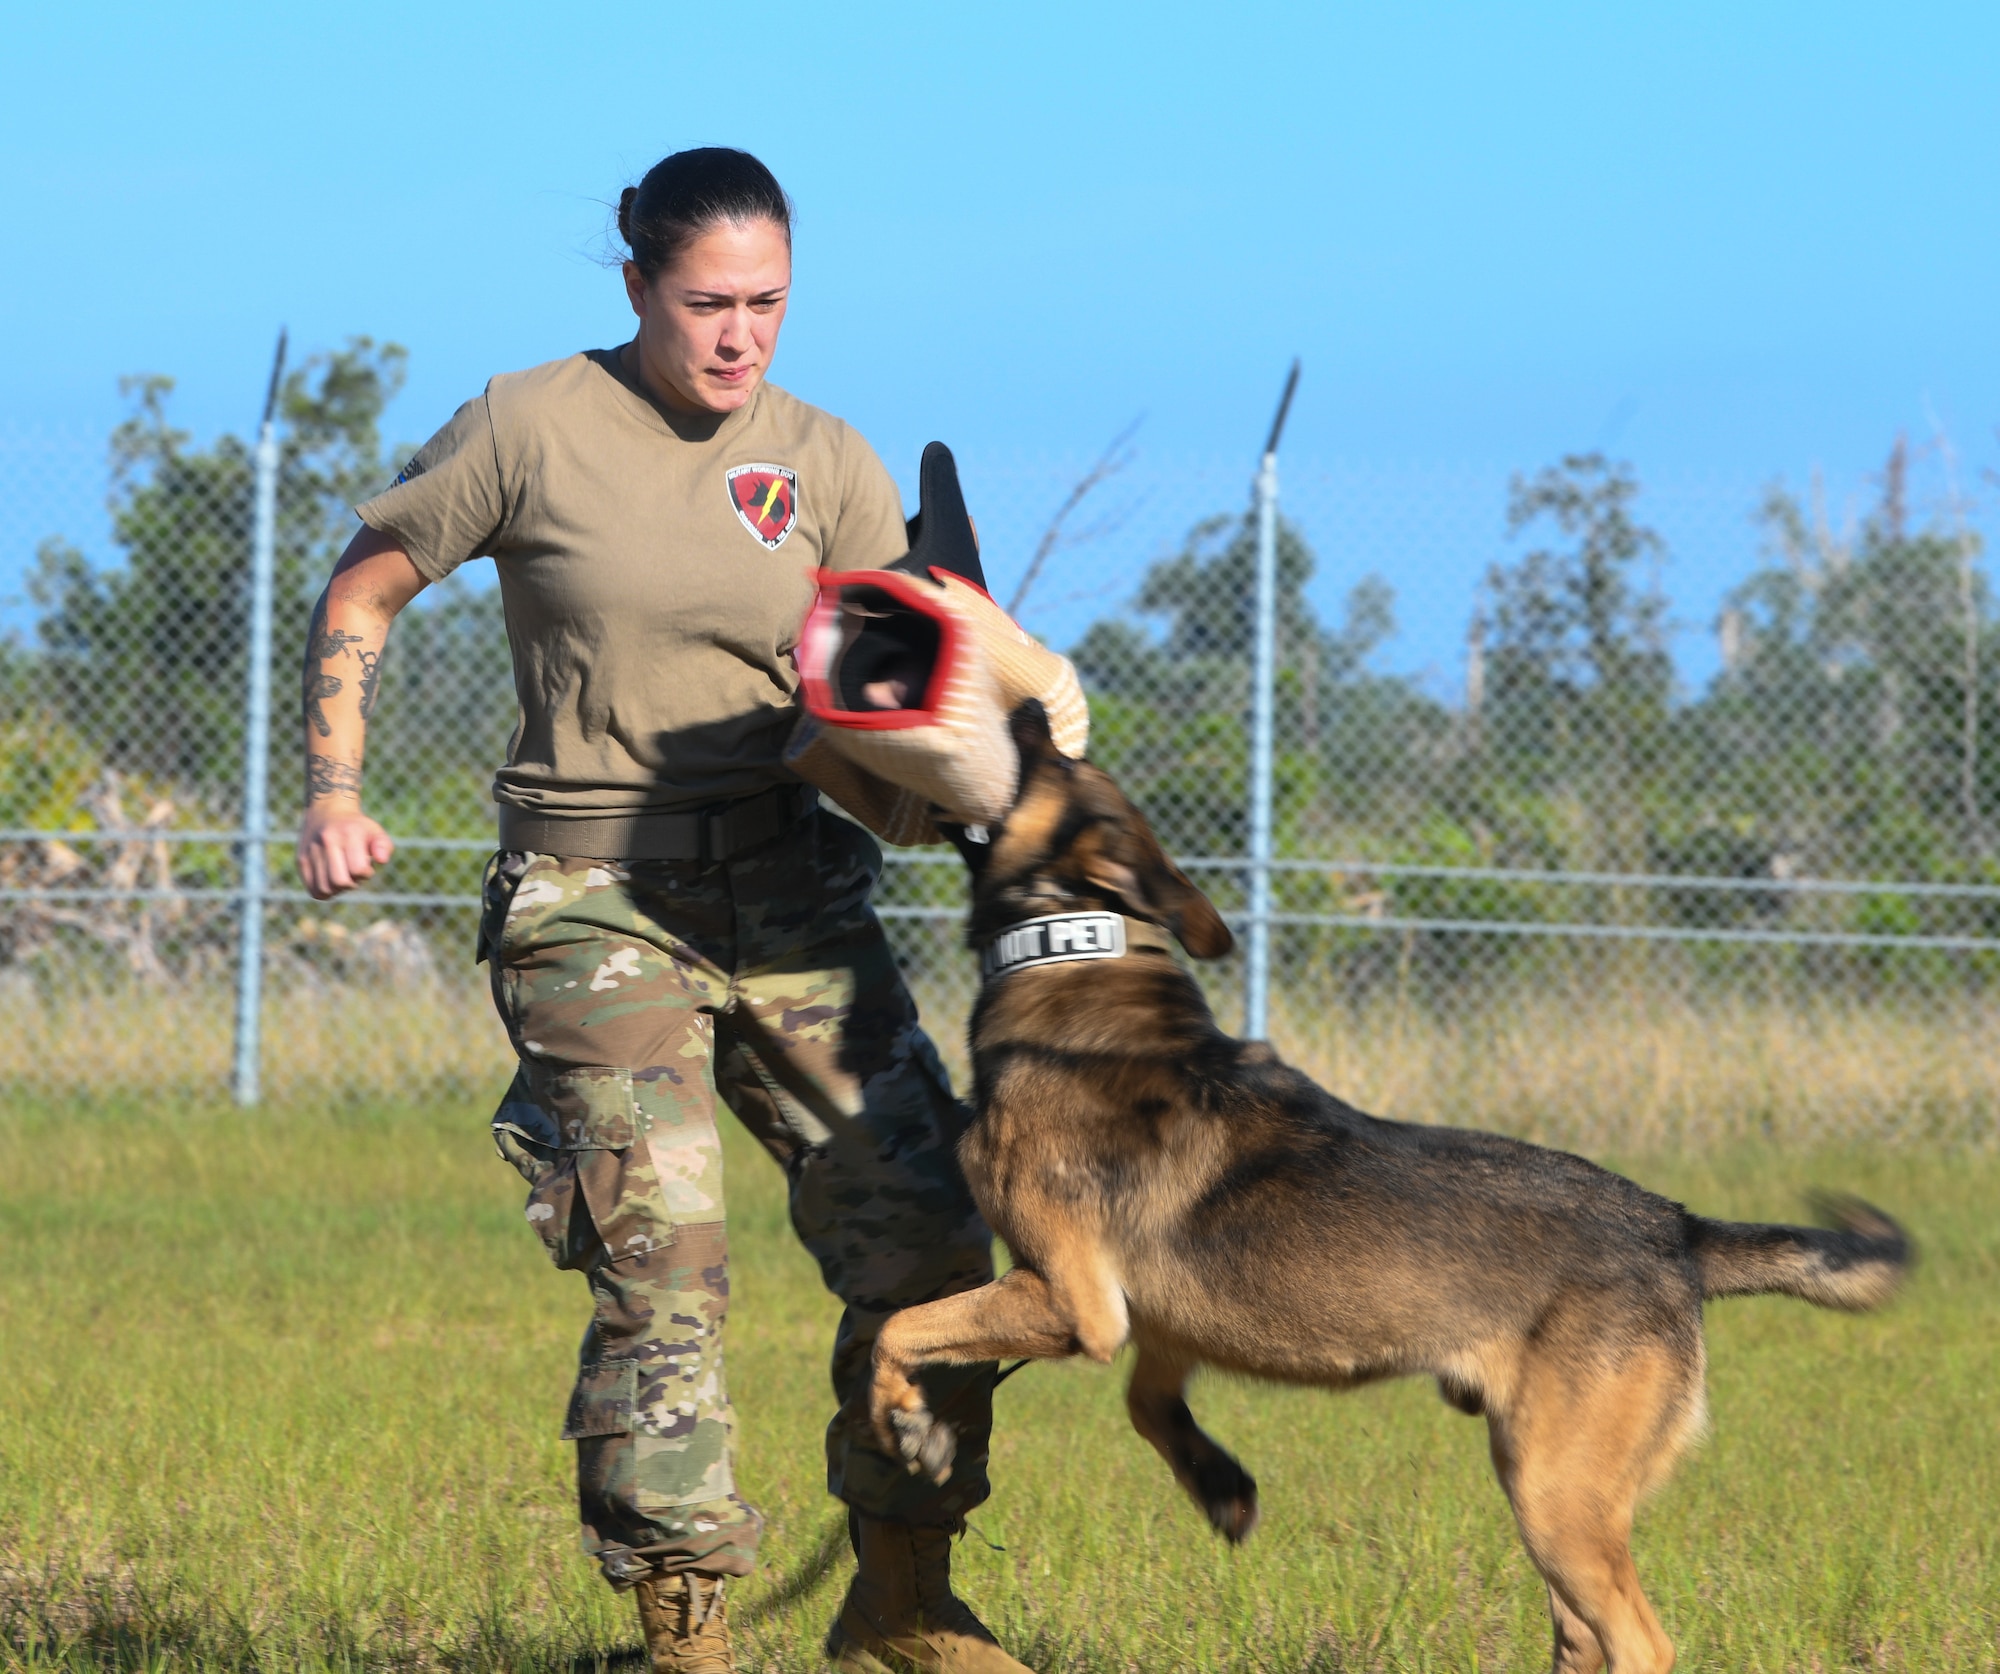 U.S. Air Force Senior Airman Brianna Irven is bit on her protective gear by a military working dog during a demonstration.